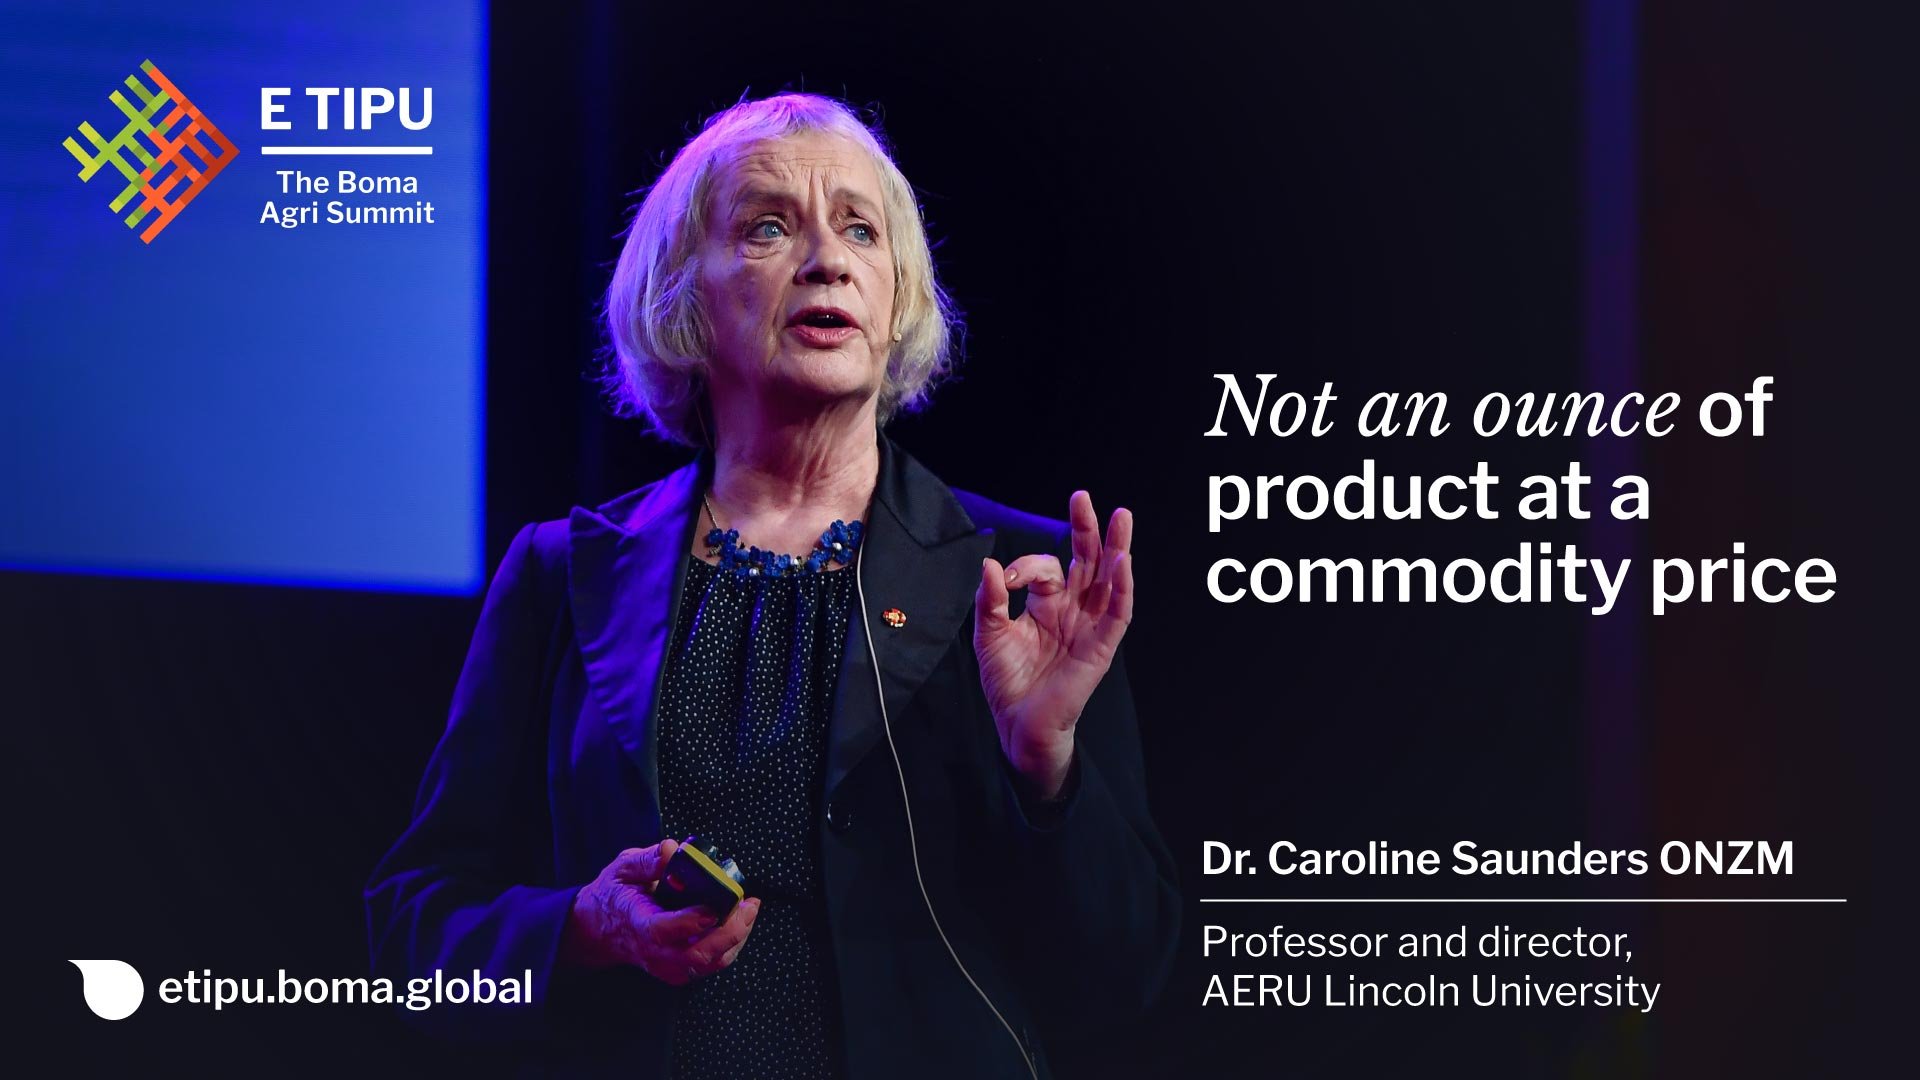 Not an ounce of product at a commodity price | Dr. Caroline Saunders